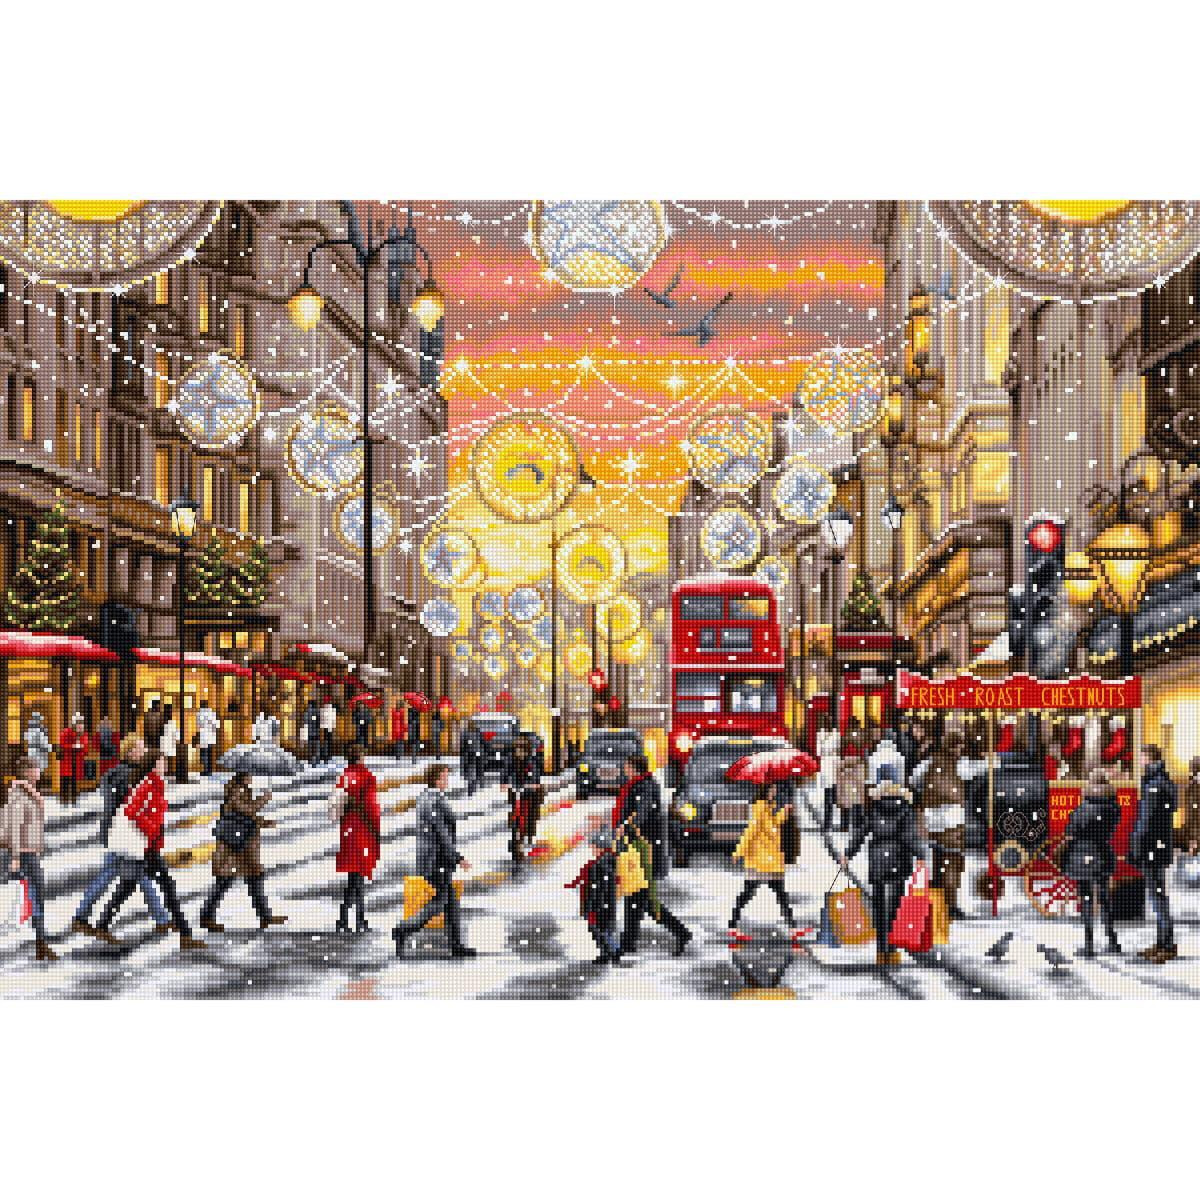 A busy city street in winter with people crossing a...